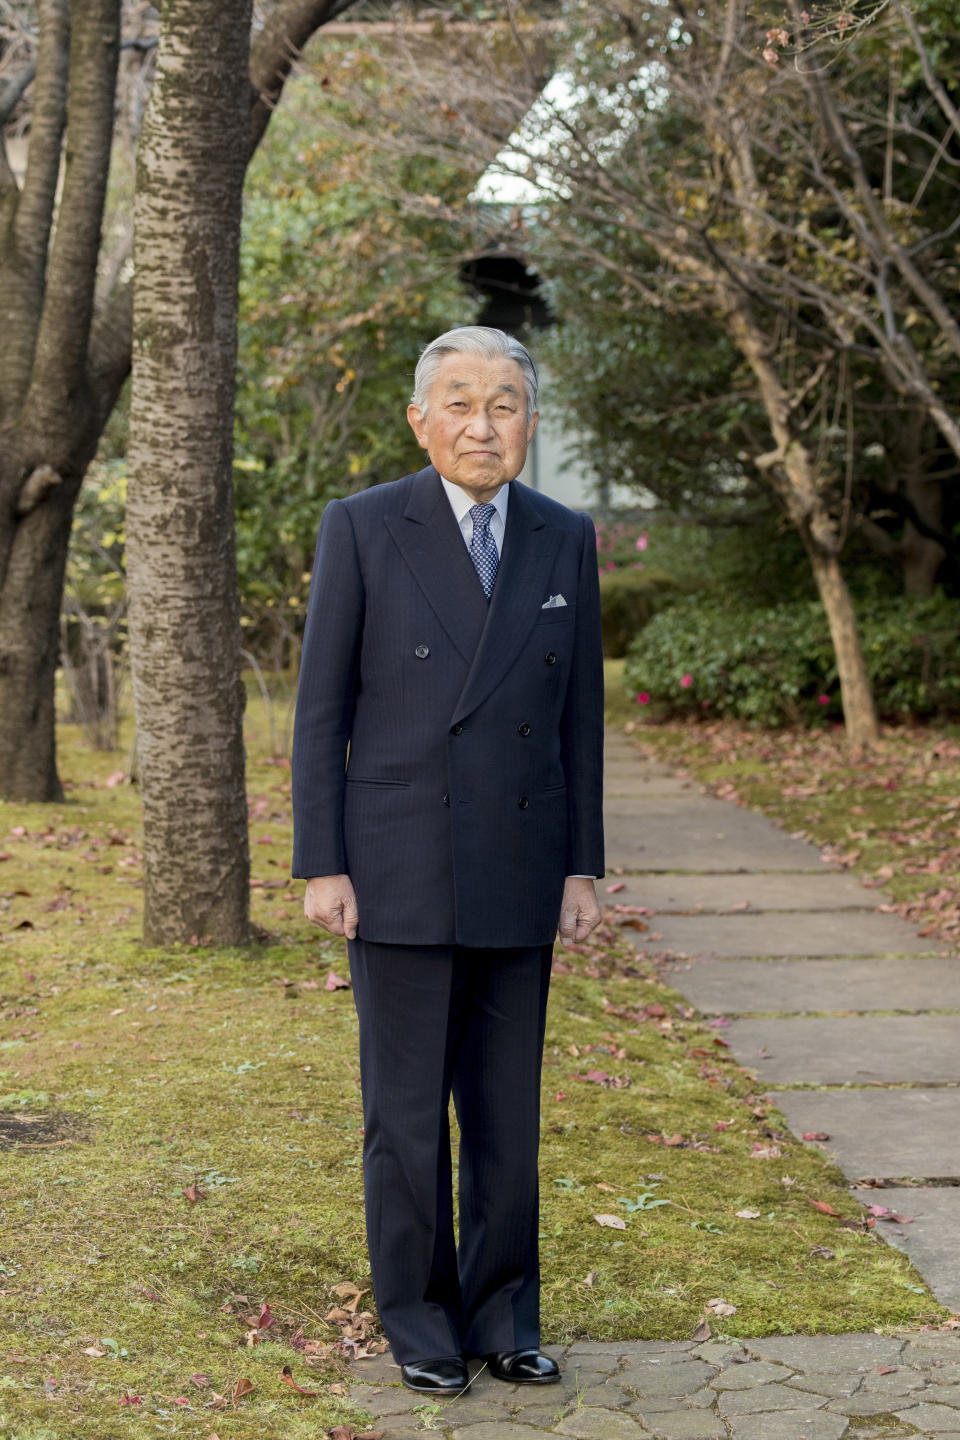 In this Monday, Dec. 10, 2018, photo released on Friday, Dec. 21, 2018, by the Imperial Household Agency of Japan, Japan's Emperor Akihito poses for a photograph at the garden of the Imperial Palace in Tokyo. Emperor Akihito, who turns 85 on Sunday, Dec. 23, and will abdicate this spring, says he feels relieved to see the era of his reign coming to an end without having seen his country at war. (The Imperial Household Agency of Japan via AP)